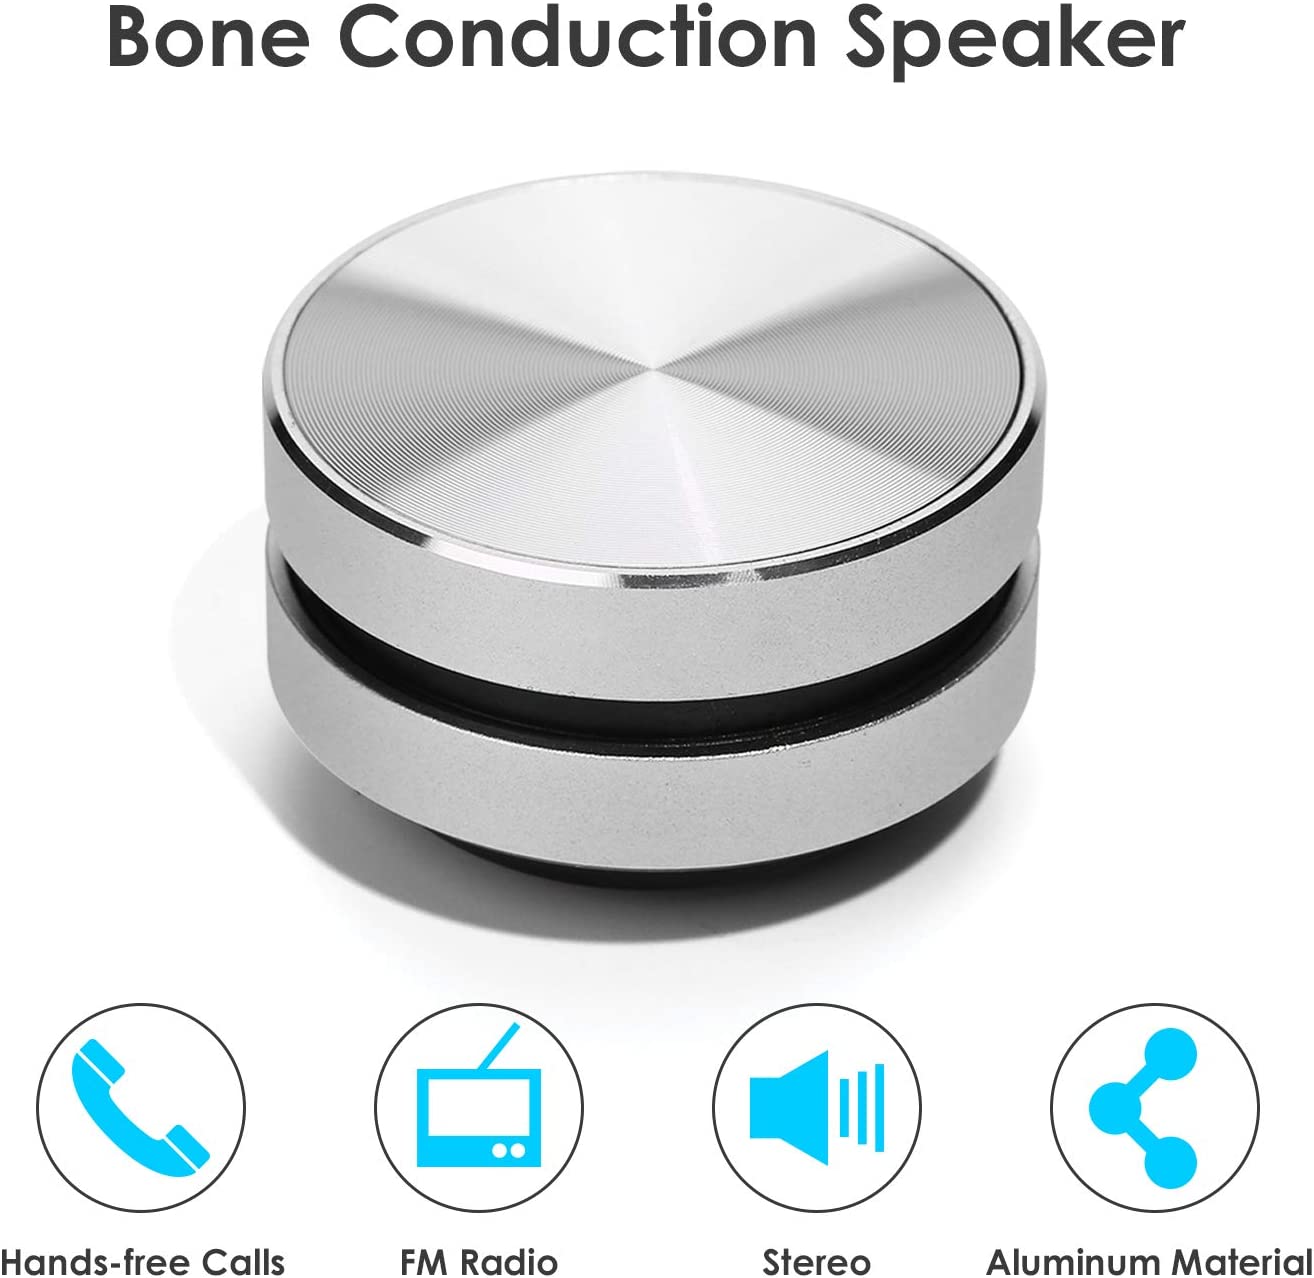 Vibration Conduction Speaker Stereo Sound (turns any surface into a speaker)